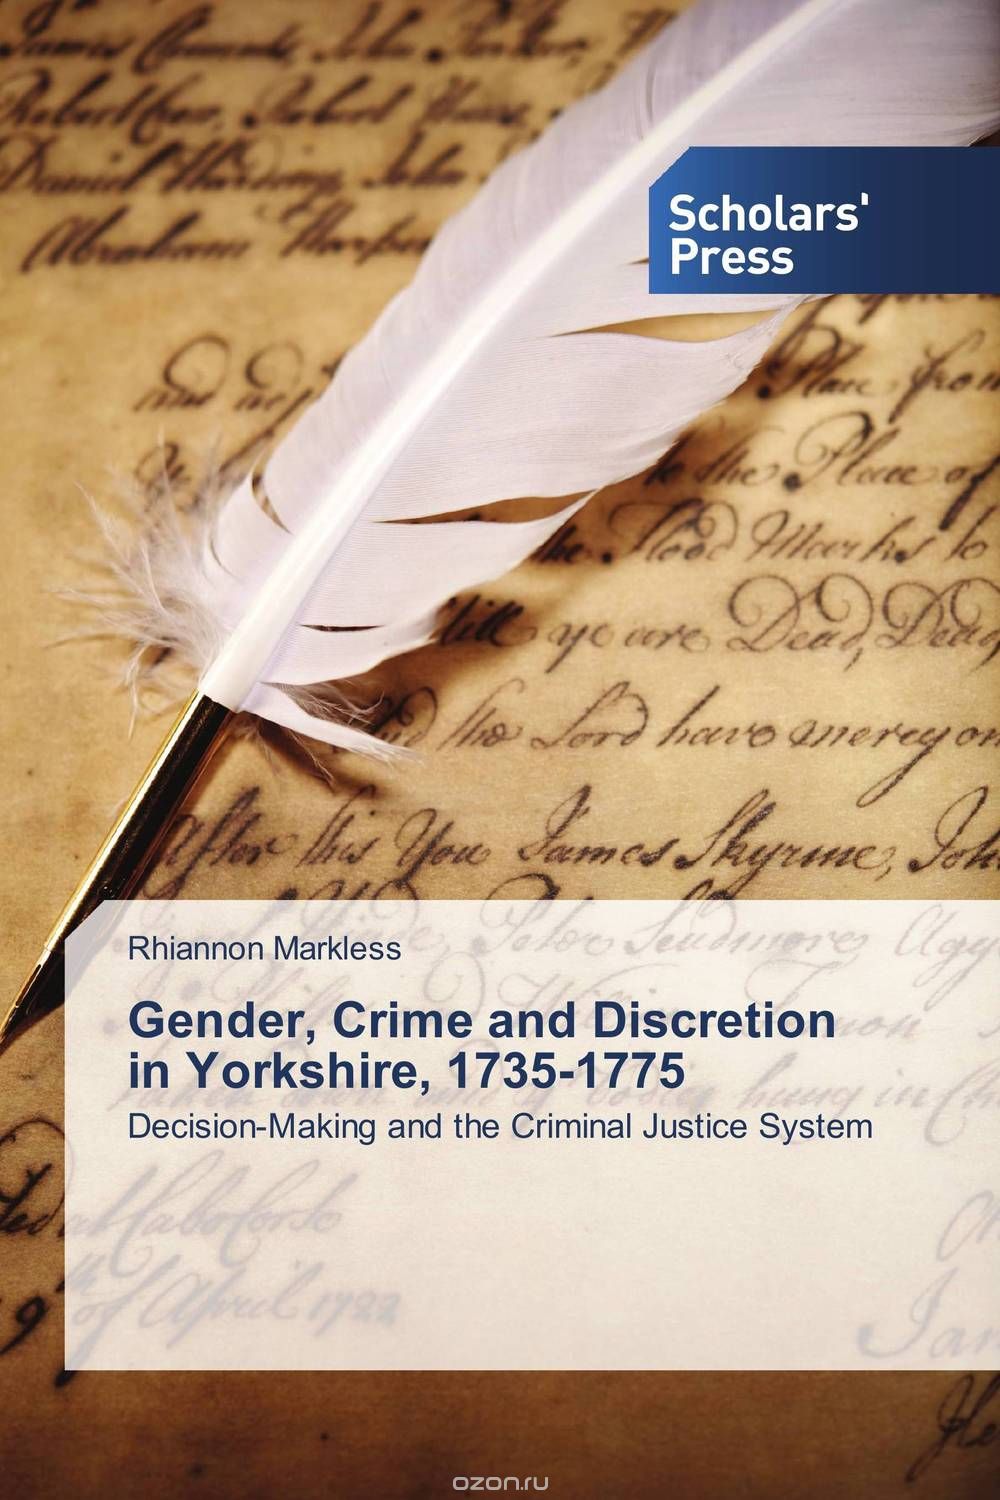 Gender, Crime and Discretion in Yorkshire, 1735-1775